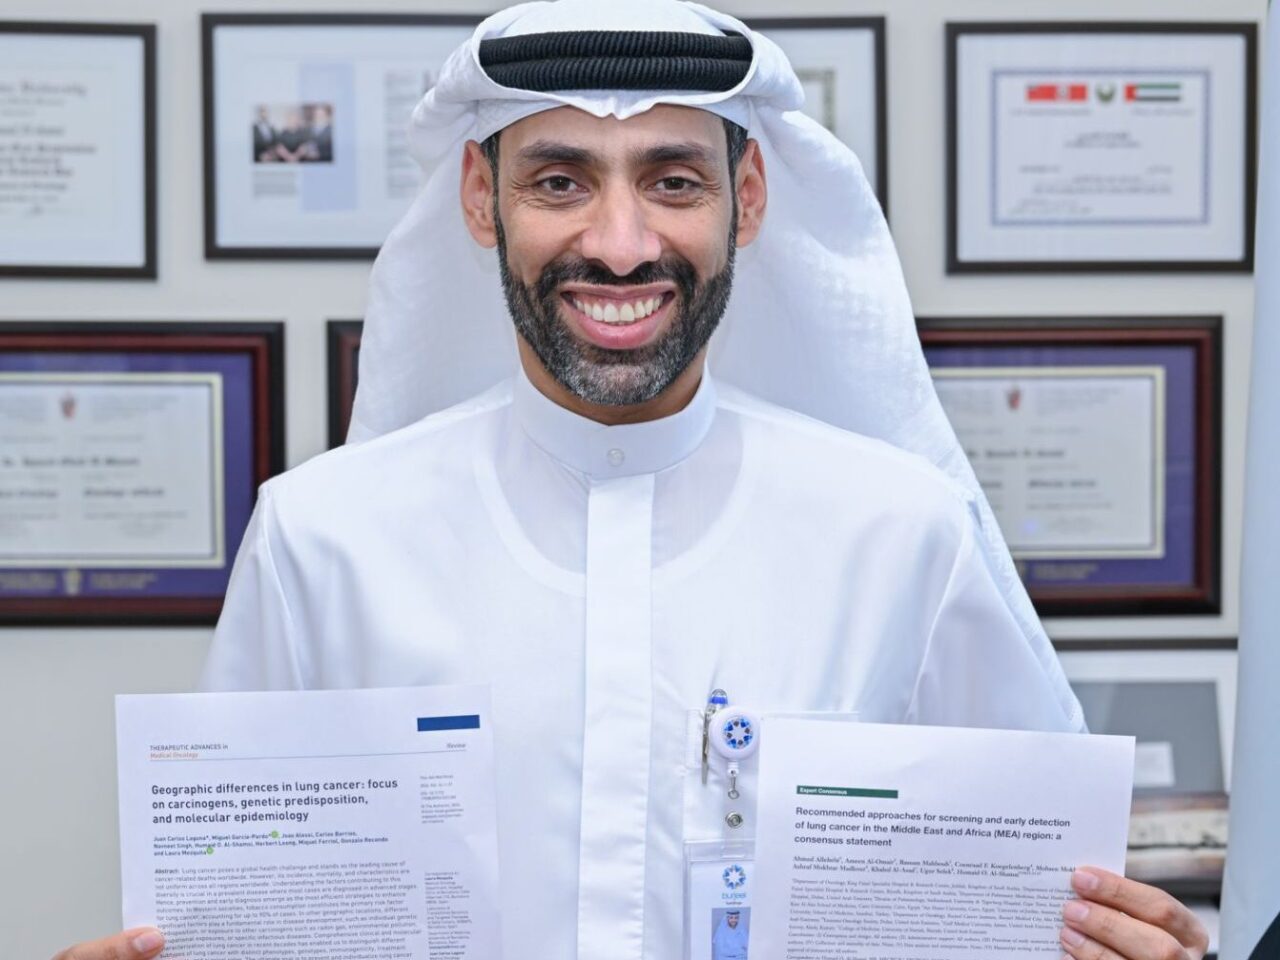 Humaid Al-Shamsi: Pleased to share with you our latest 2 publications published on the same day about lung cancer